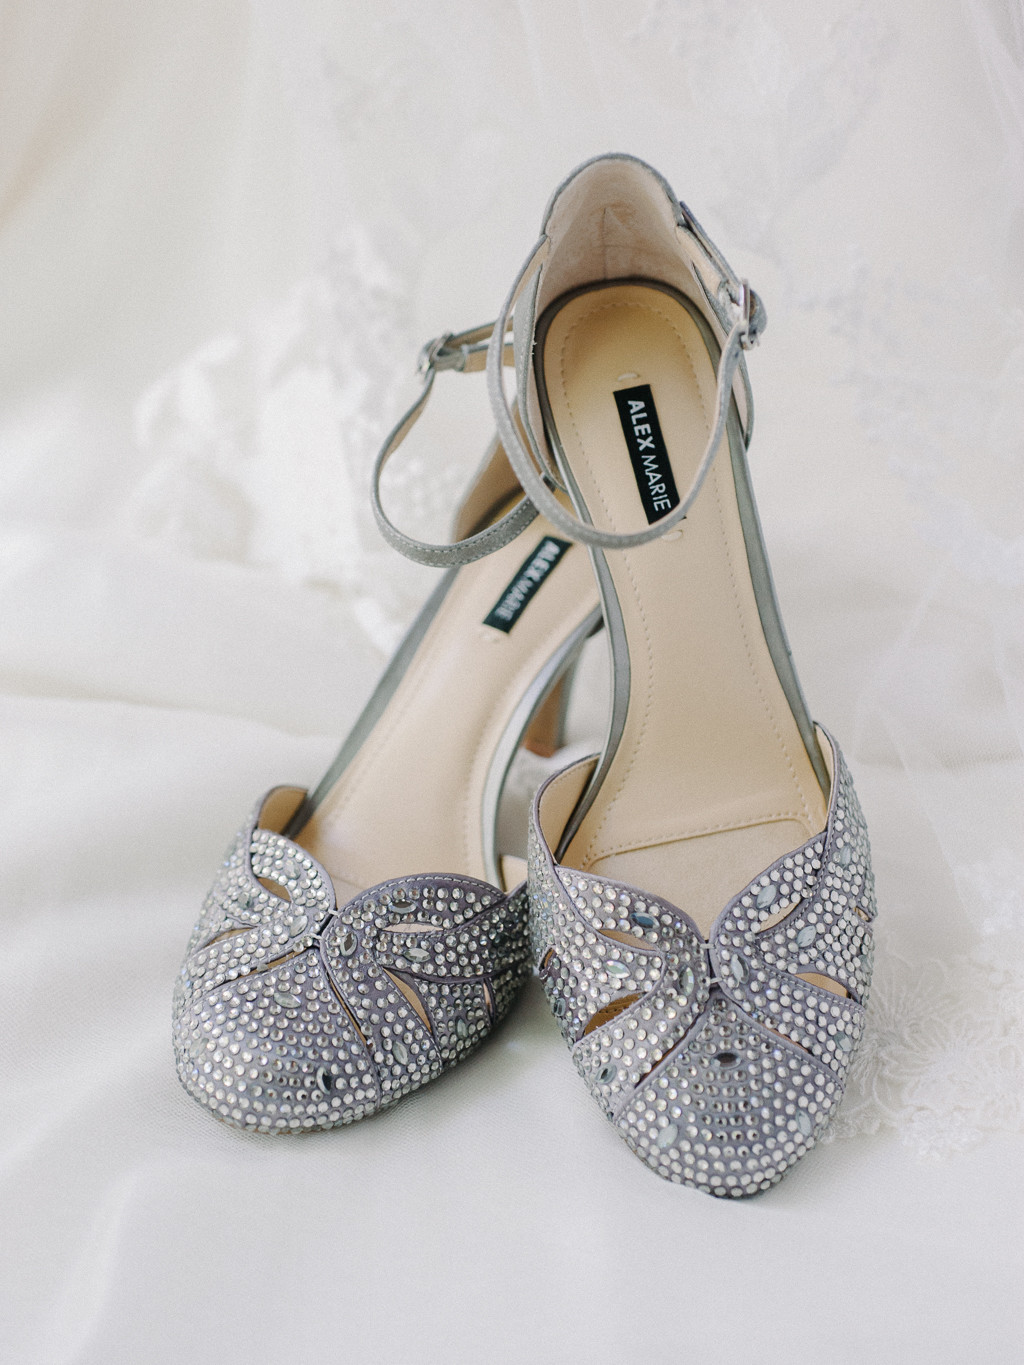 Jcpenney Wedding Shoes
 Outfit & Attire Pretty Jeweled Sandals For Wedding